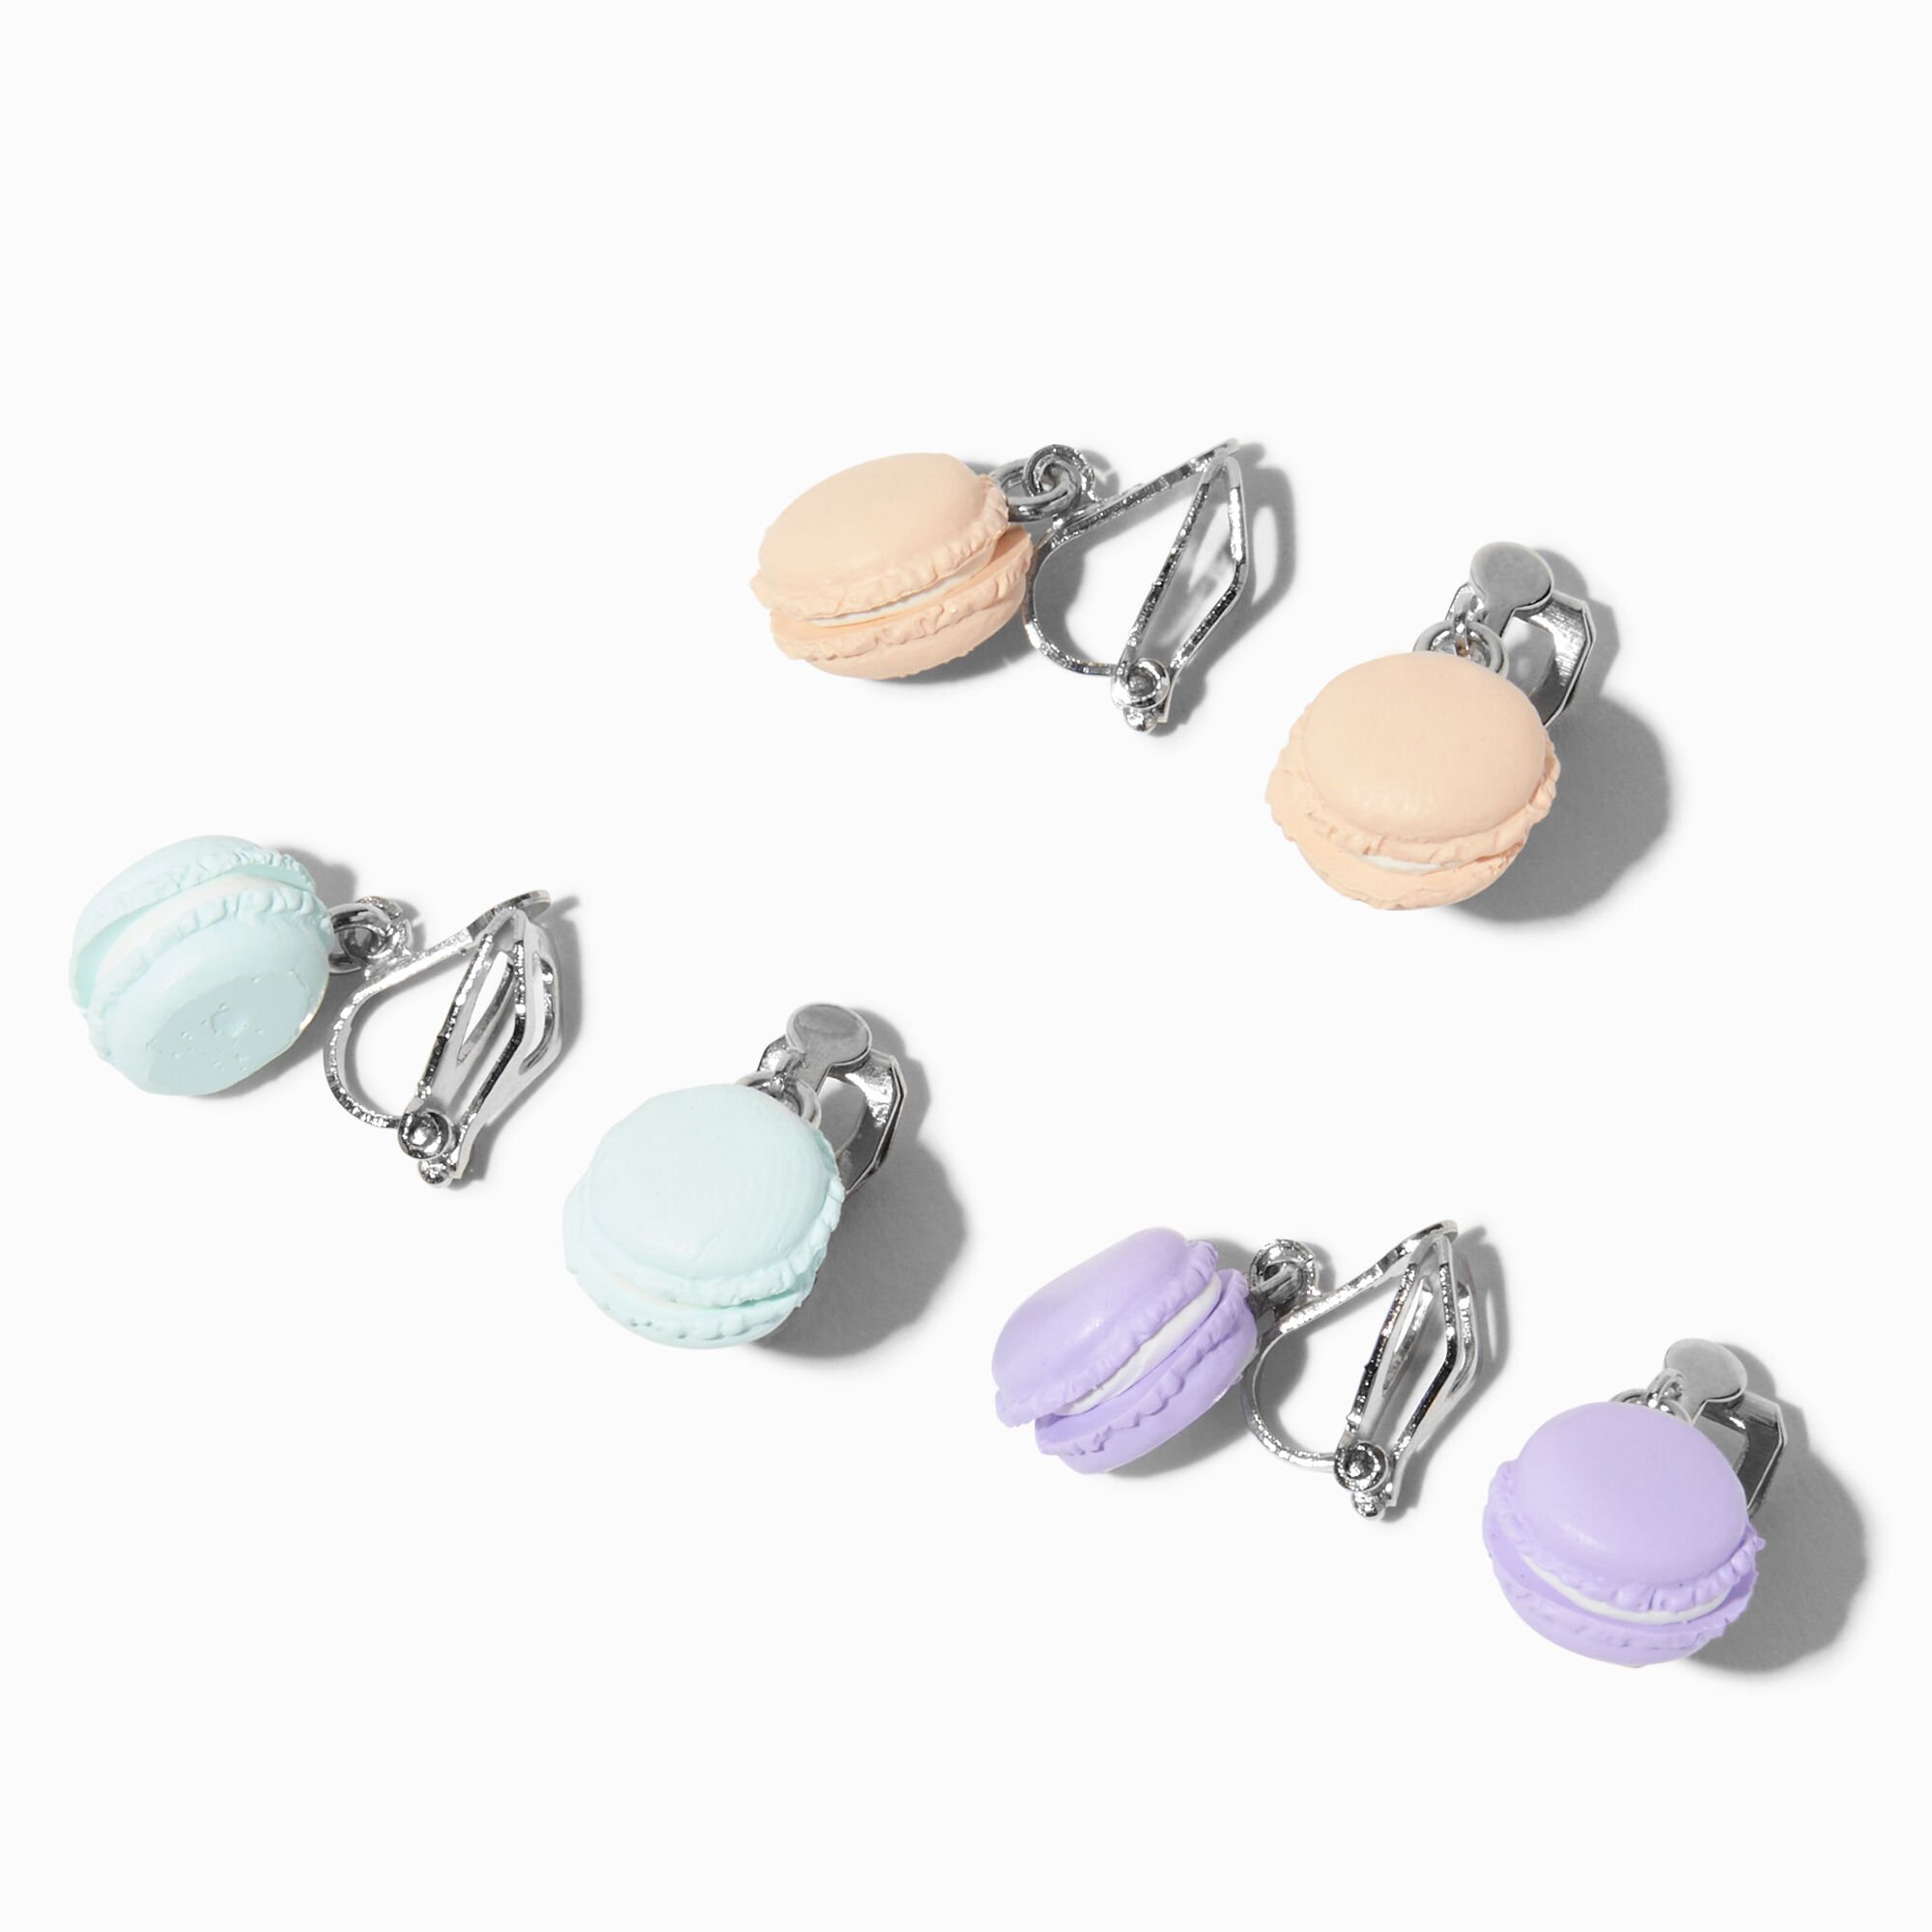 View Claires Tone 1 Macaron ClipOn Drop Earrings 3 Pack Silver information